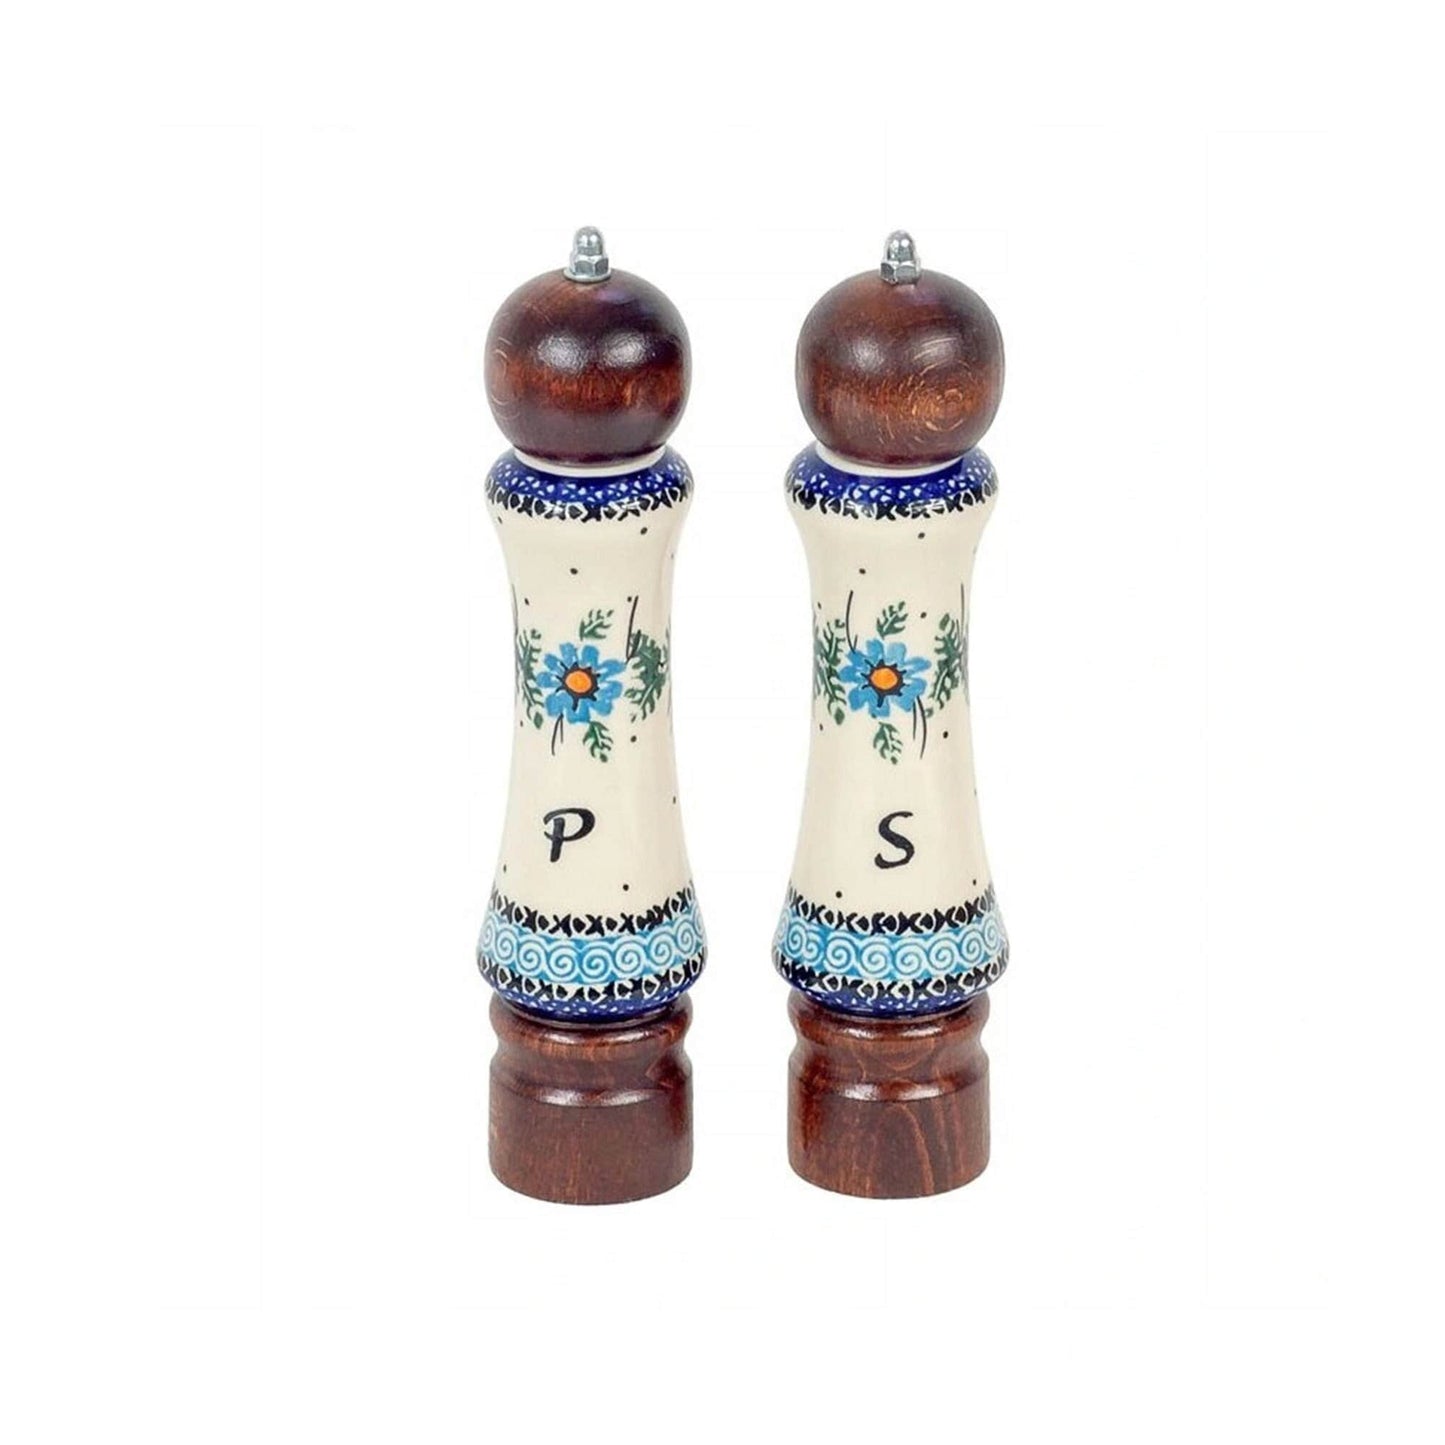 Ceramic grinder and salt mill, pepper grinder, beautifully decorated, practical gift, beautiful table decoration, ceramic grinder